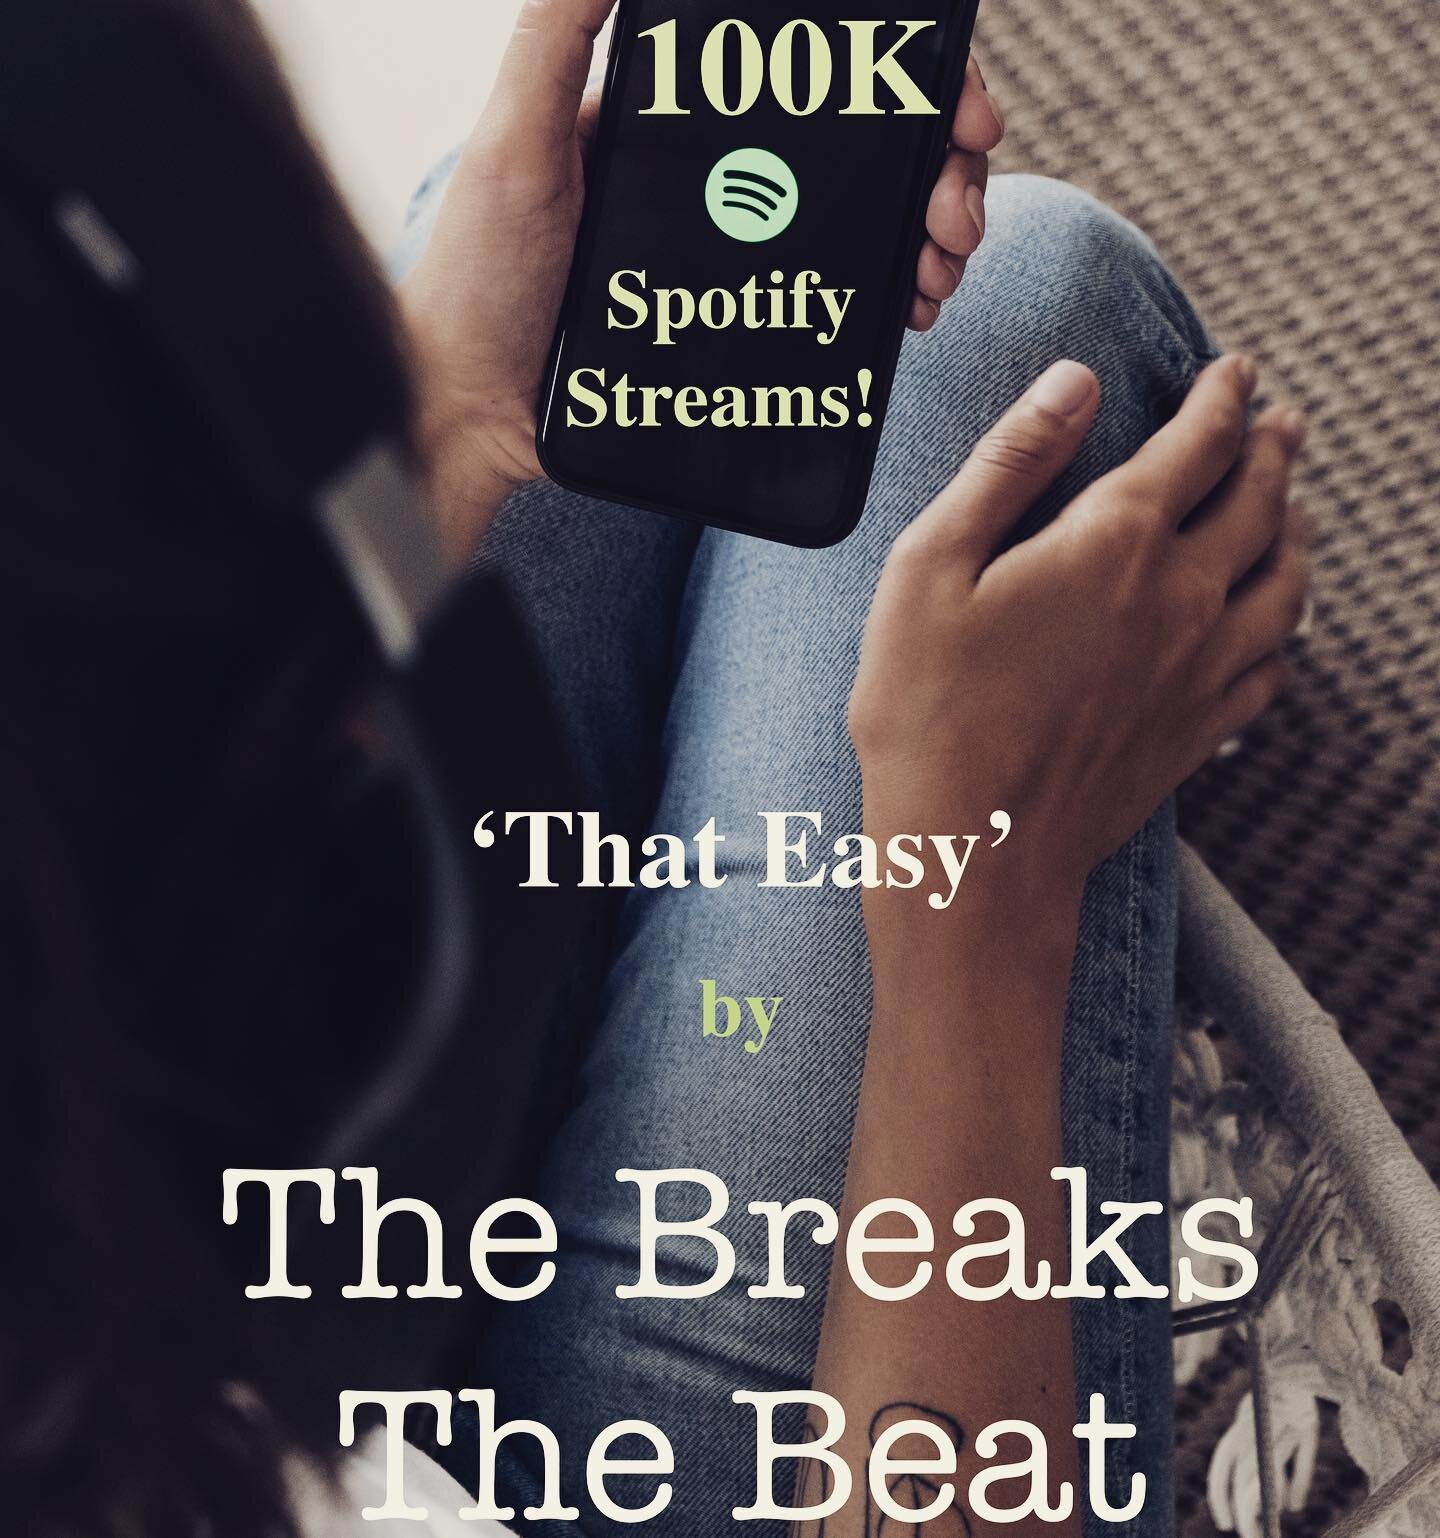 Thank you for 100,000 Spotify Streams of our new tune &lsquo;That Easy&rsquo;! Means the world to us. Check it out if you haven&rsquo;t already! ;) #thebreaksthebeat